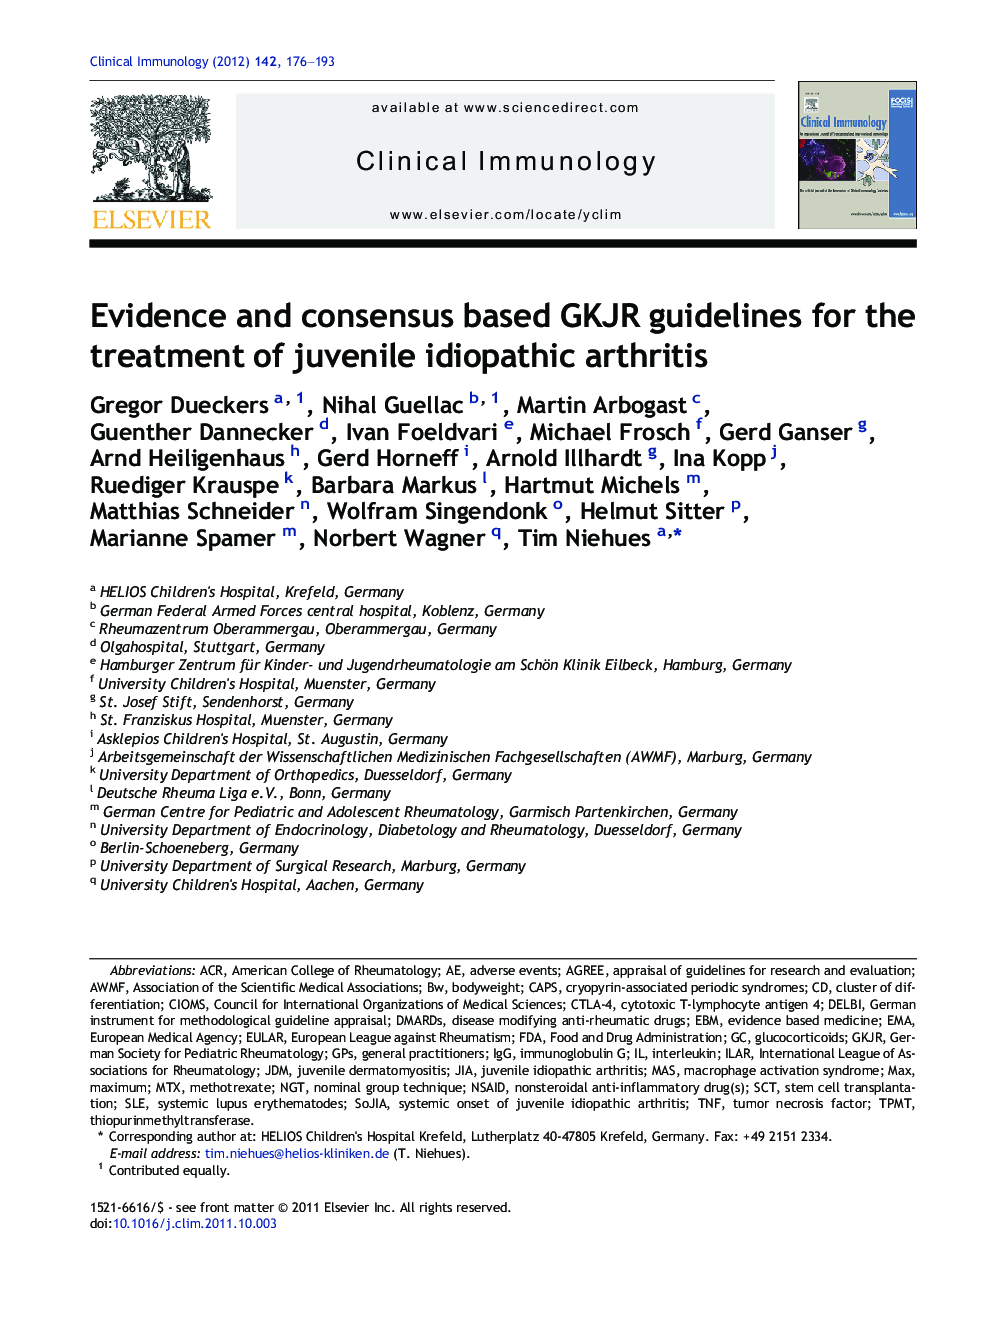 Evidence and consensus based GKJR guidelines for the treatment of juvenile idiopathic arthritis